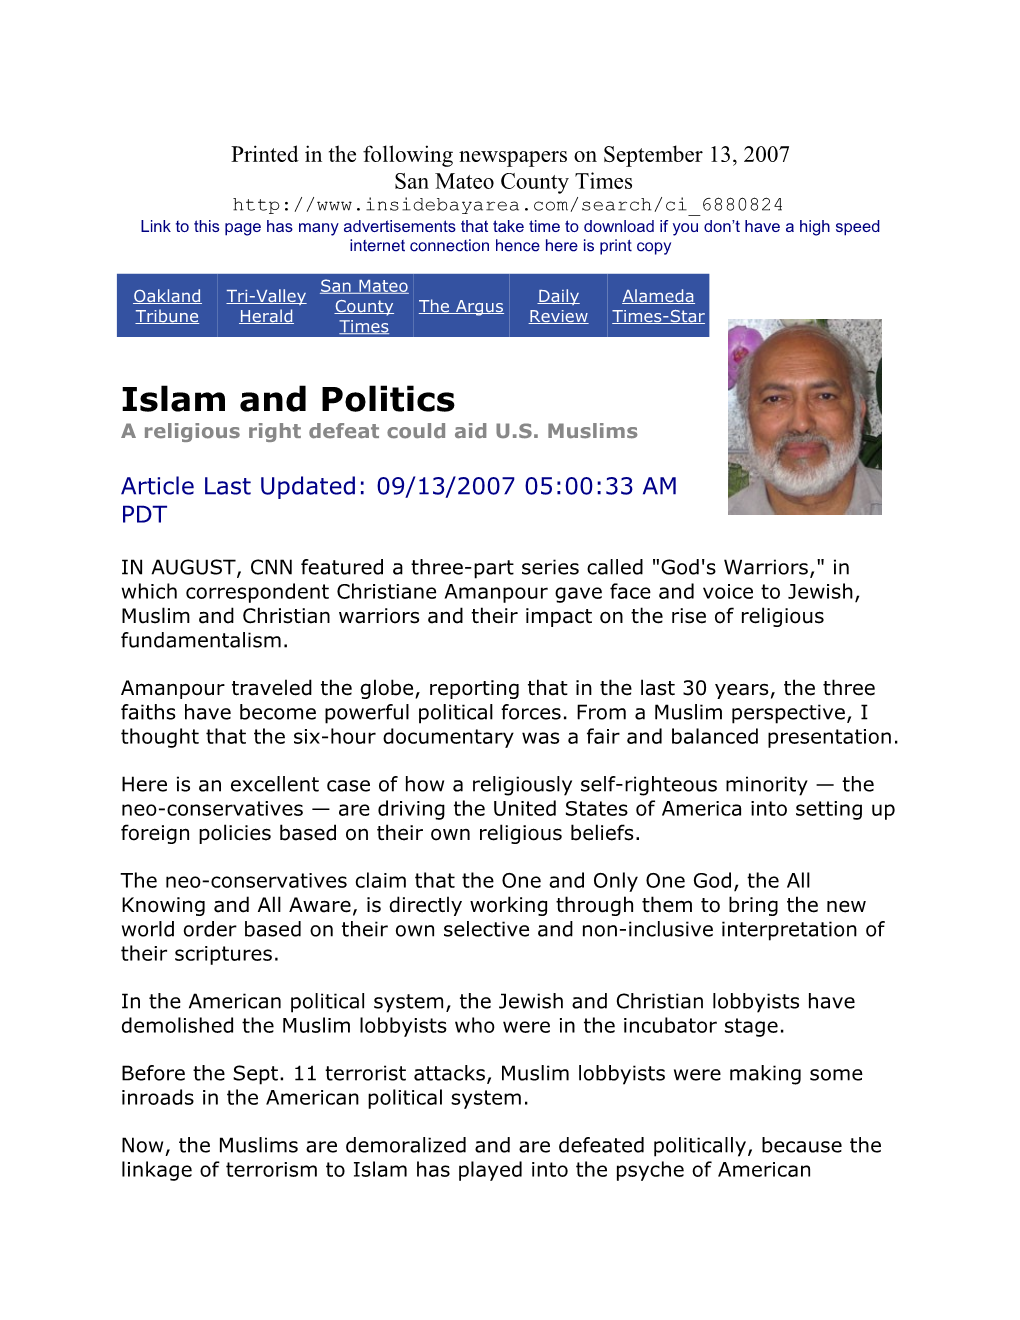 Council of American-Islamic Relations